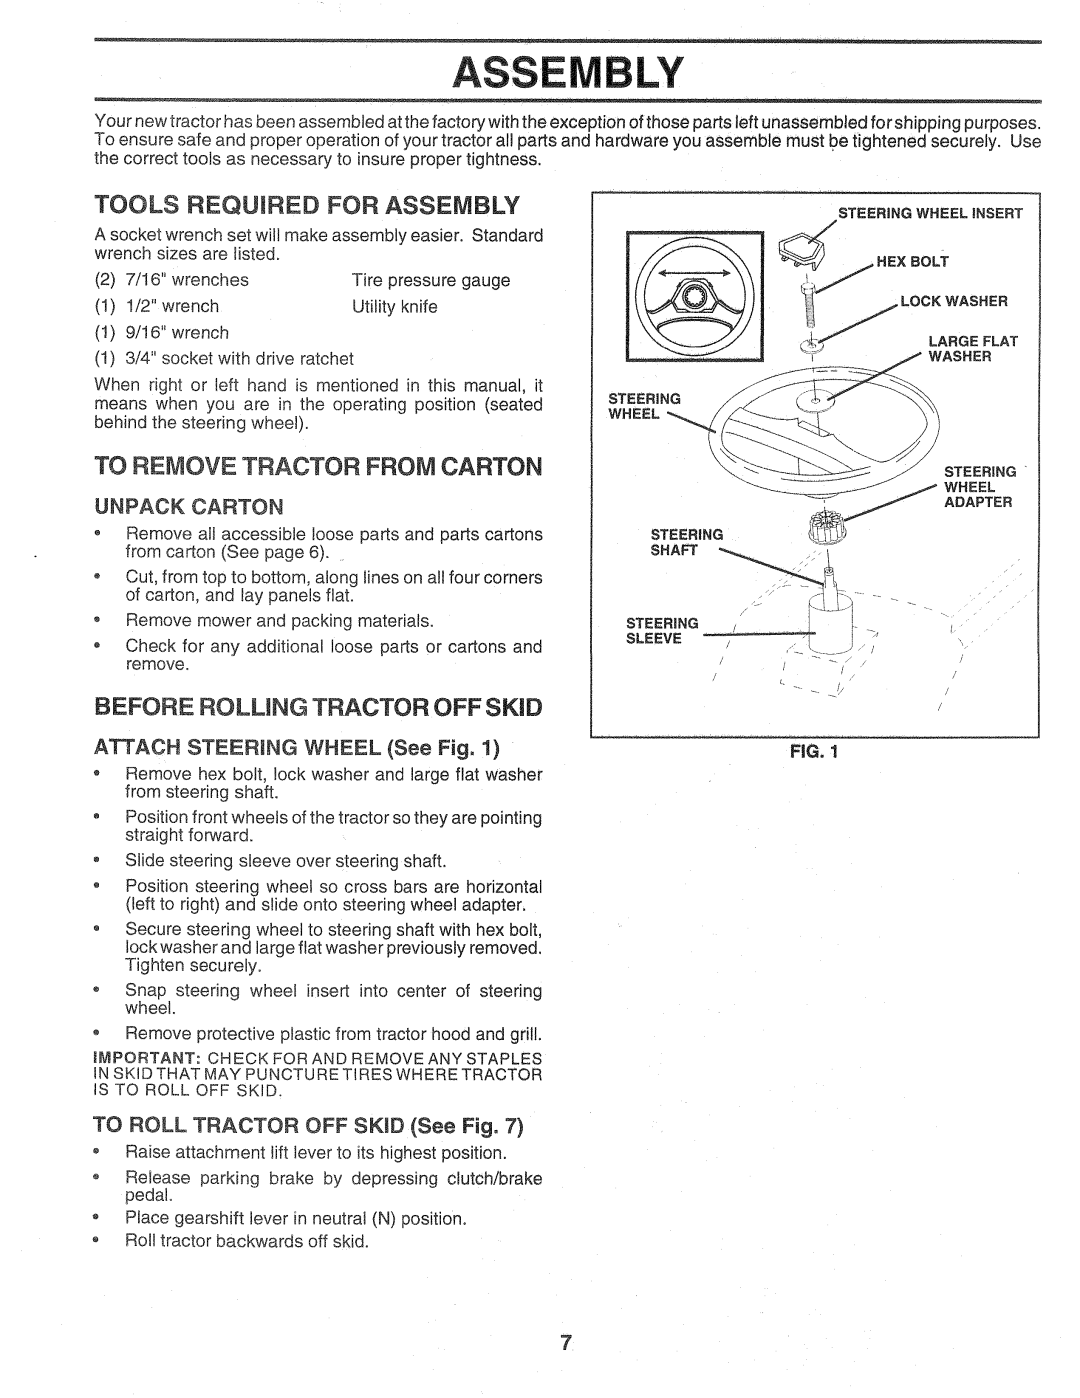 Sears 917.257720 owner manual Tools Required For Assembly, To Remove Tractor From Carton, Before Rolling Tractor Off Skid 